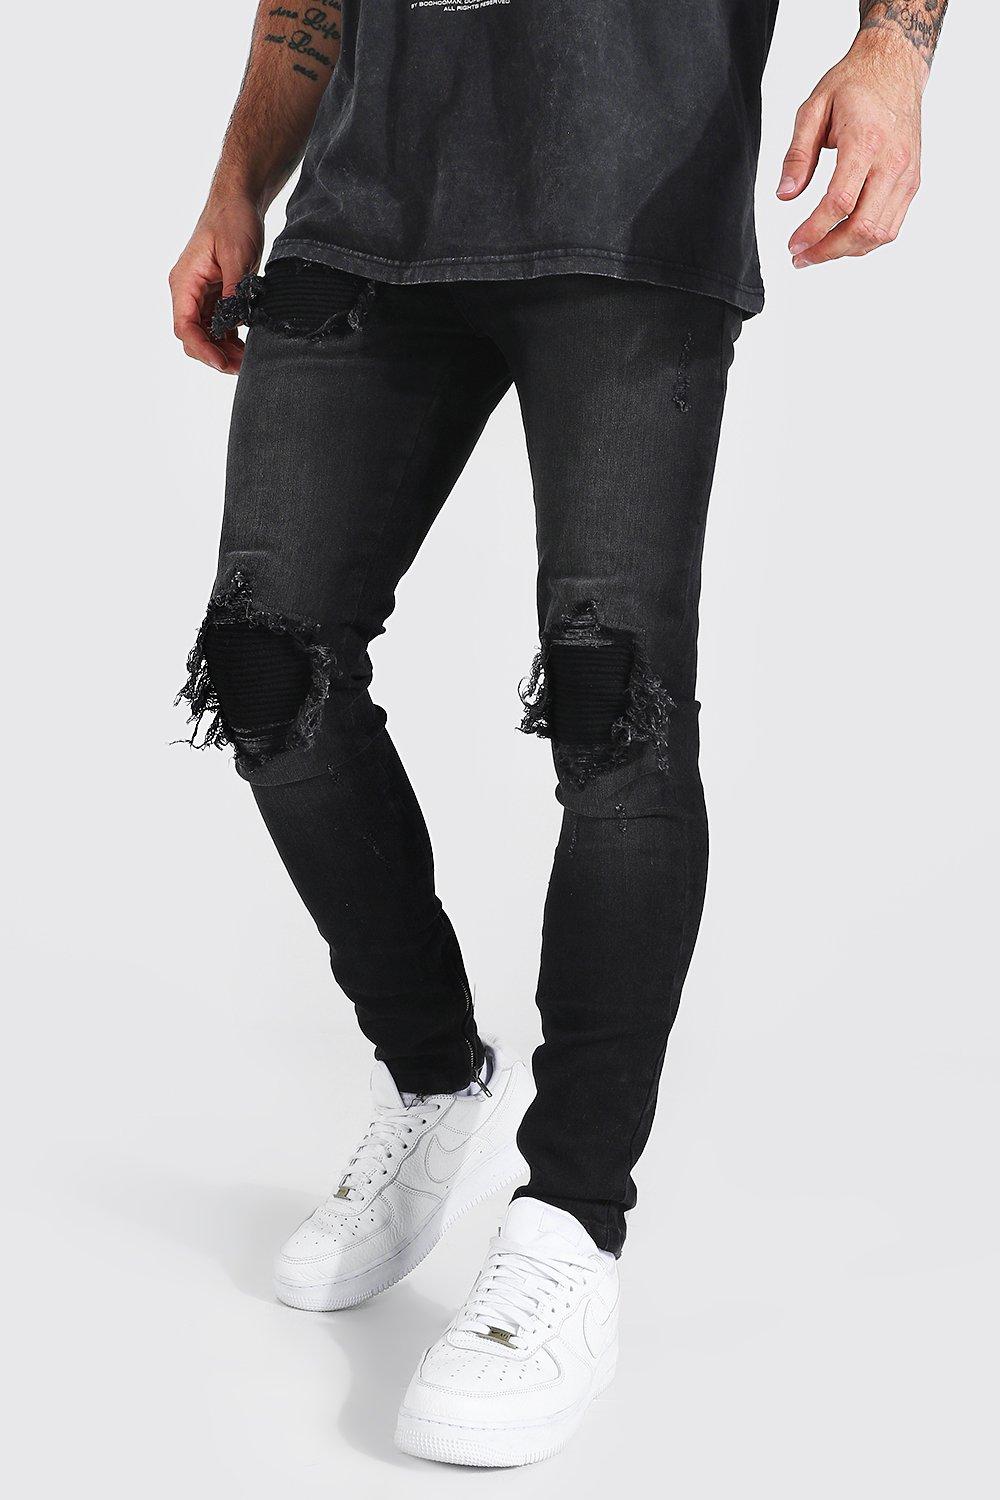 Frayed Biker Jeans Pants Men's Black Skinny Ripped Stretch Casual